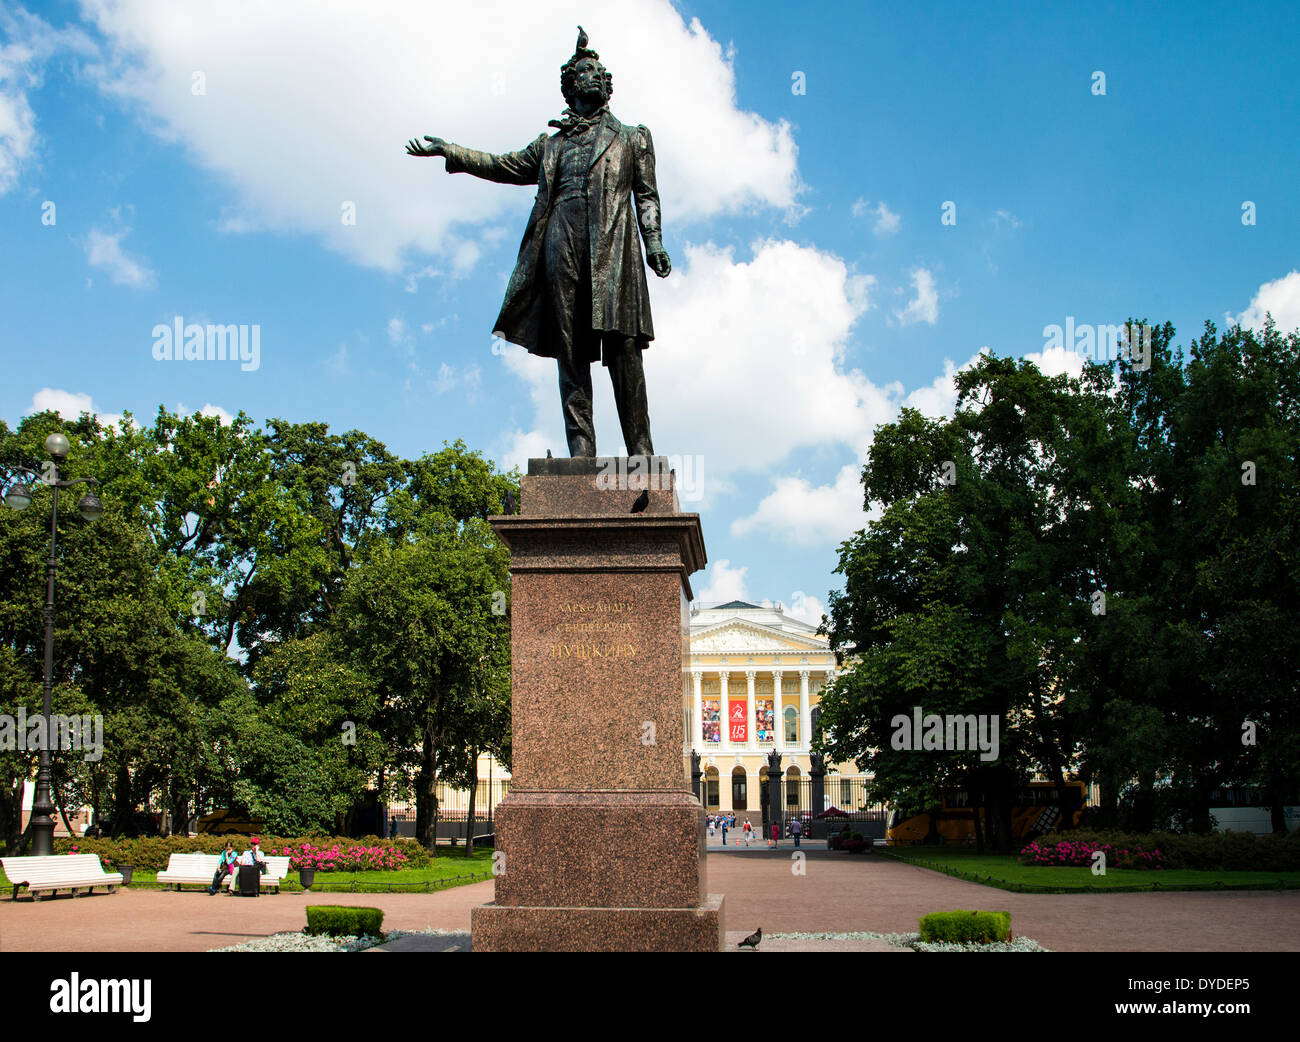 A monument to Alexander Pushkin on the Arts Square with the Mikhailovsky Palace in the background. Stock Photo